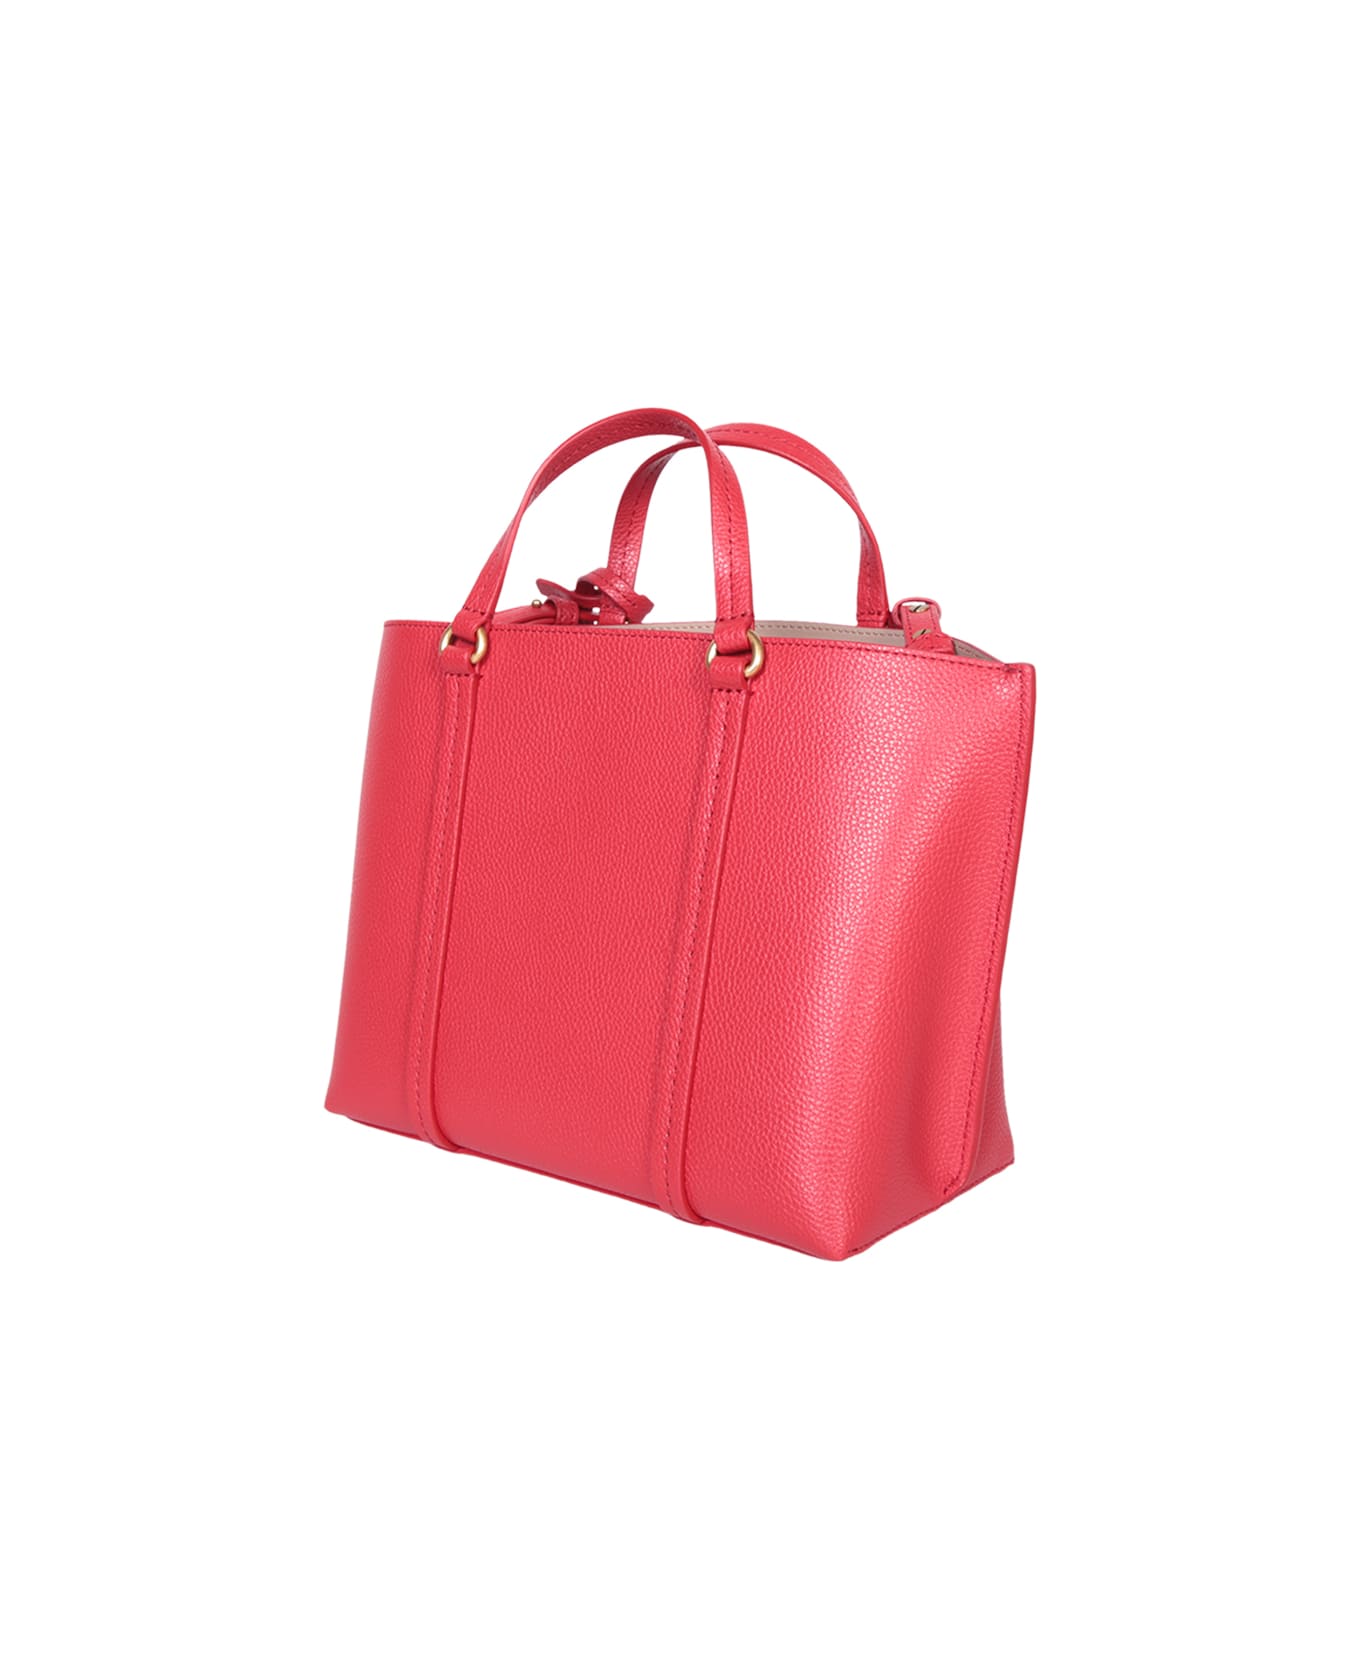 Pinko Pink Carrie Shopper Bag By Pinko - Red